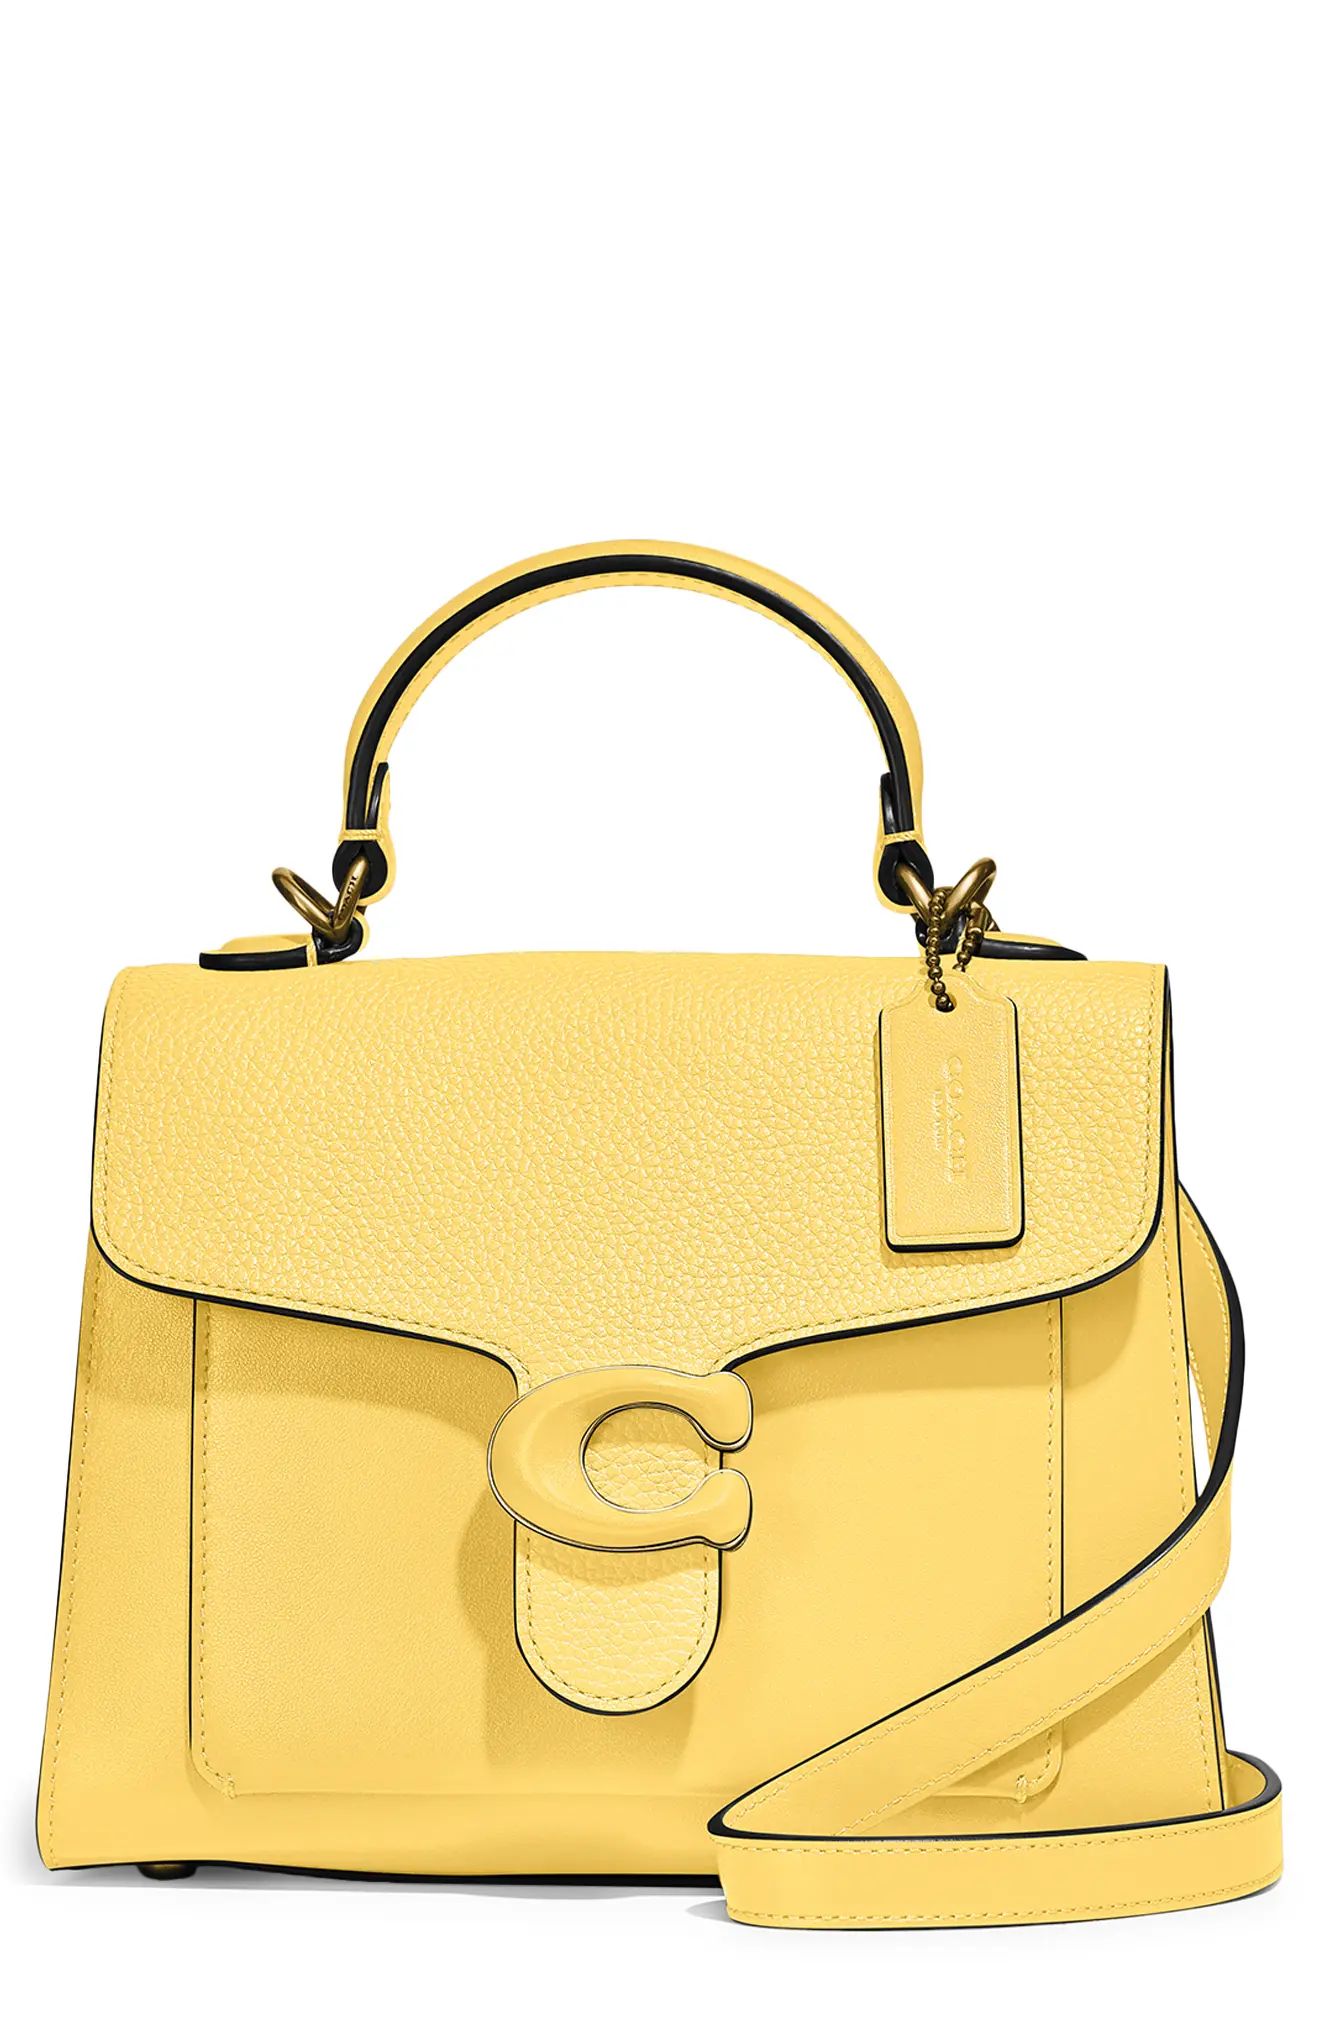 Coach Tabby Top Handle Leather Satchel - Yellow | Nordstrom